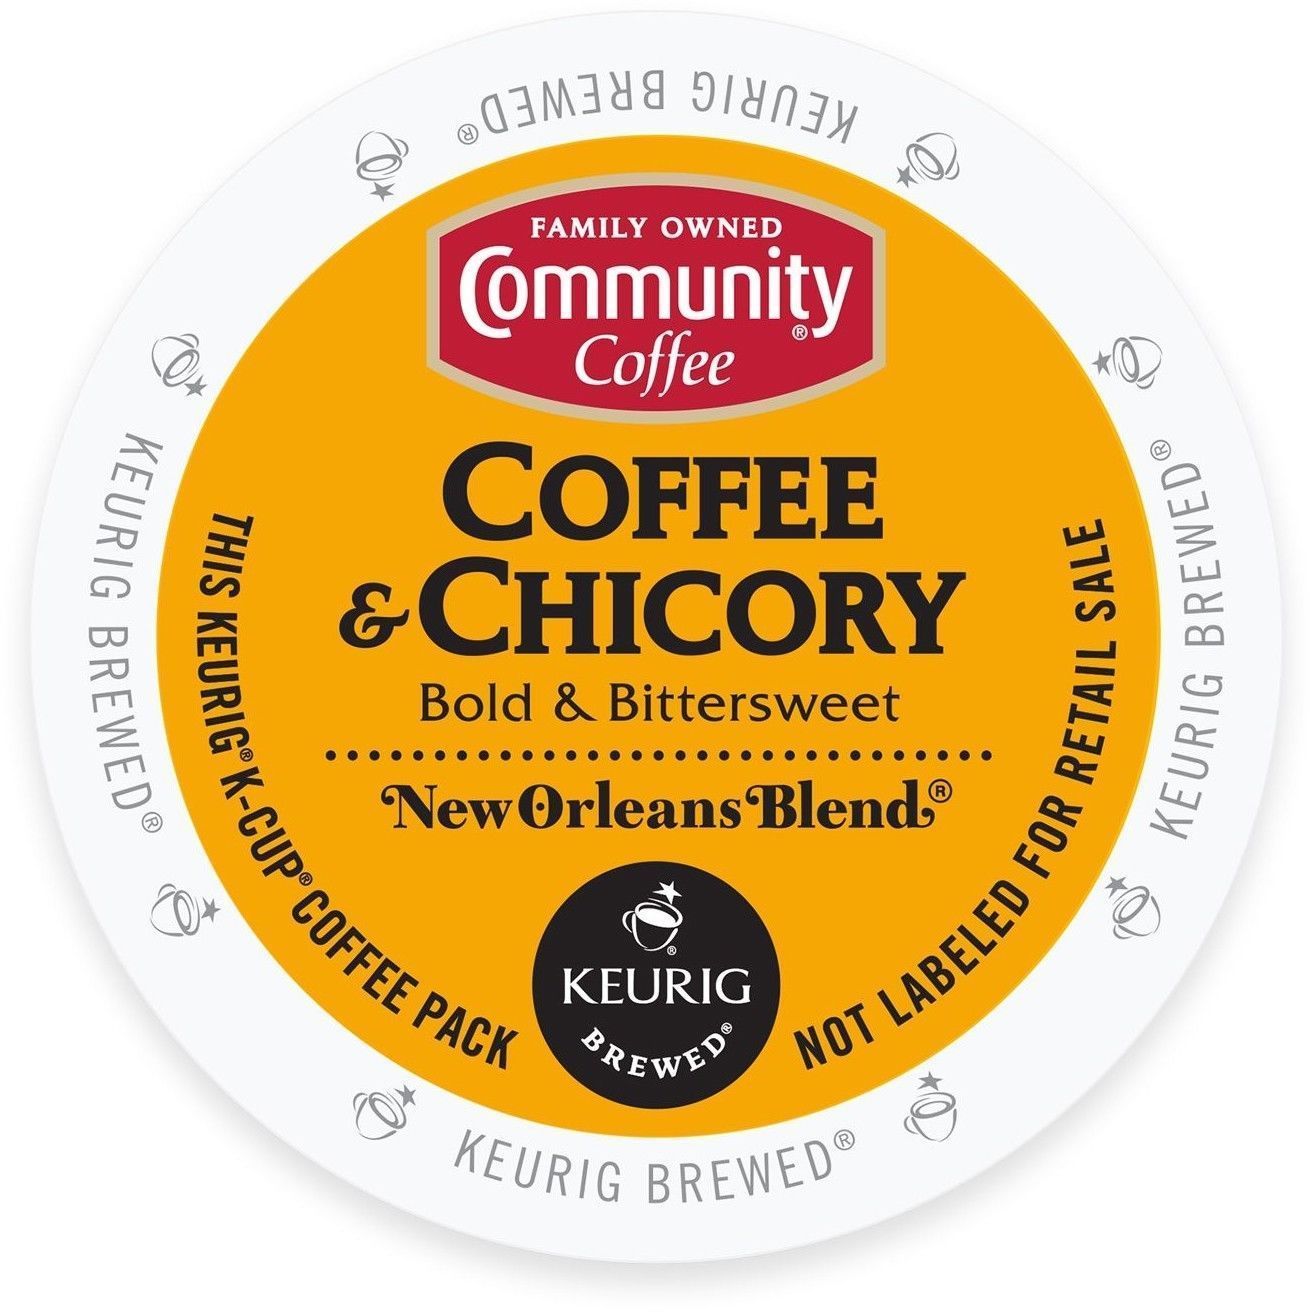 Community Coffee Coffee & Chicory 18 to 144 Keurig K cup Pods Pick Any Size  - $21.89 - $104.89